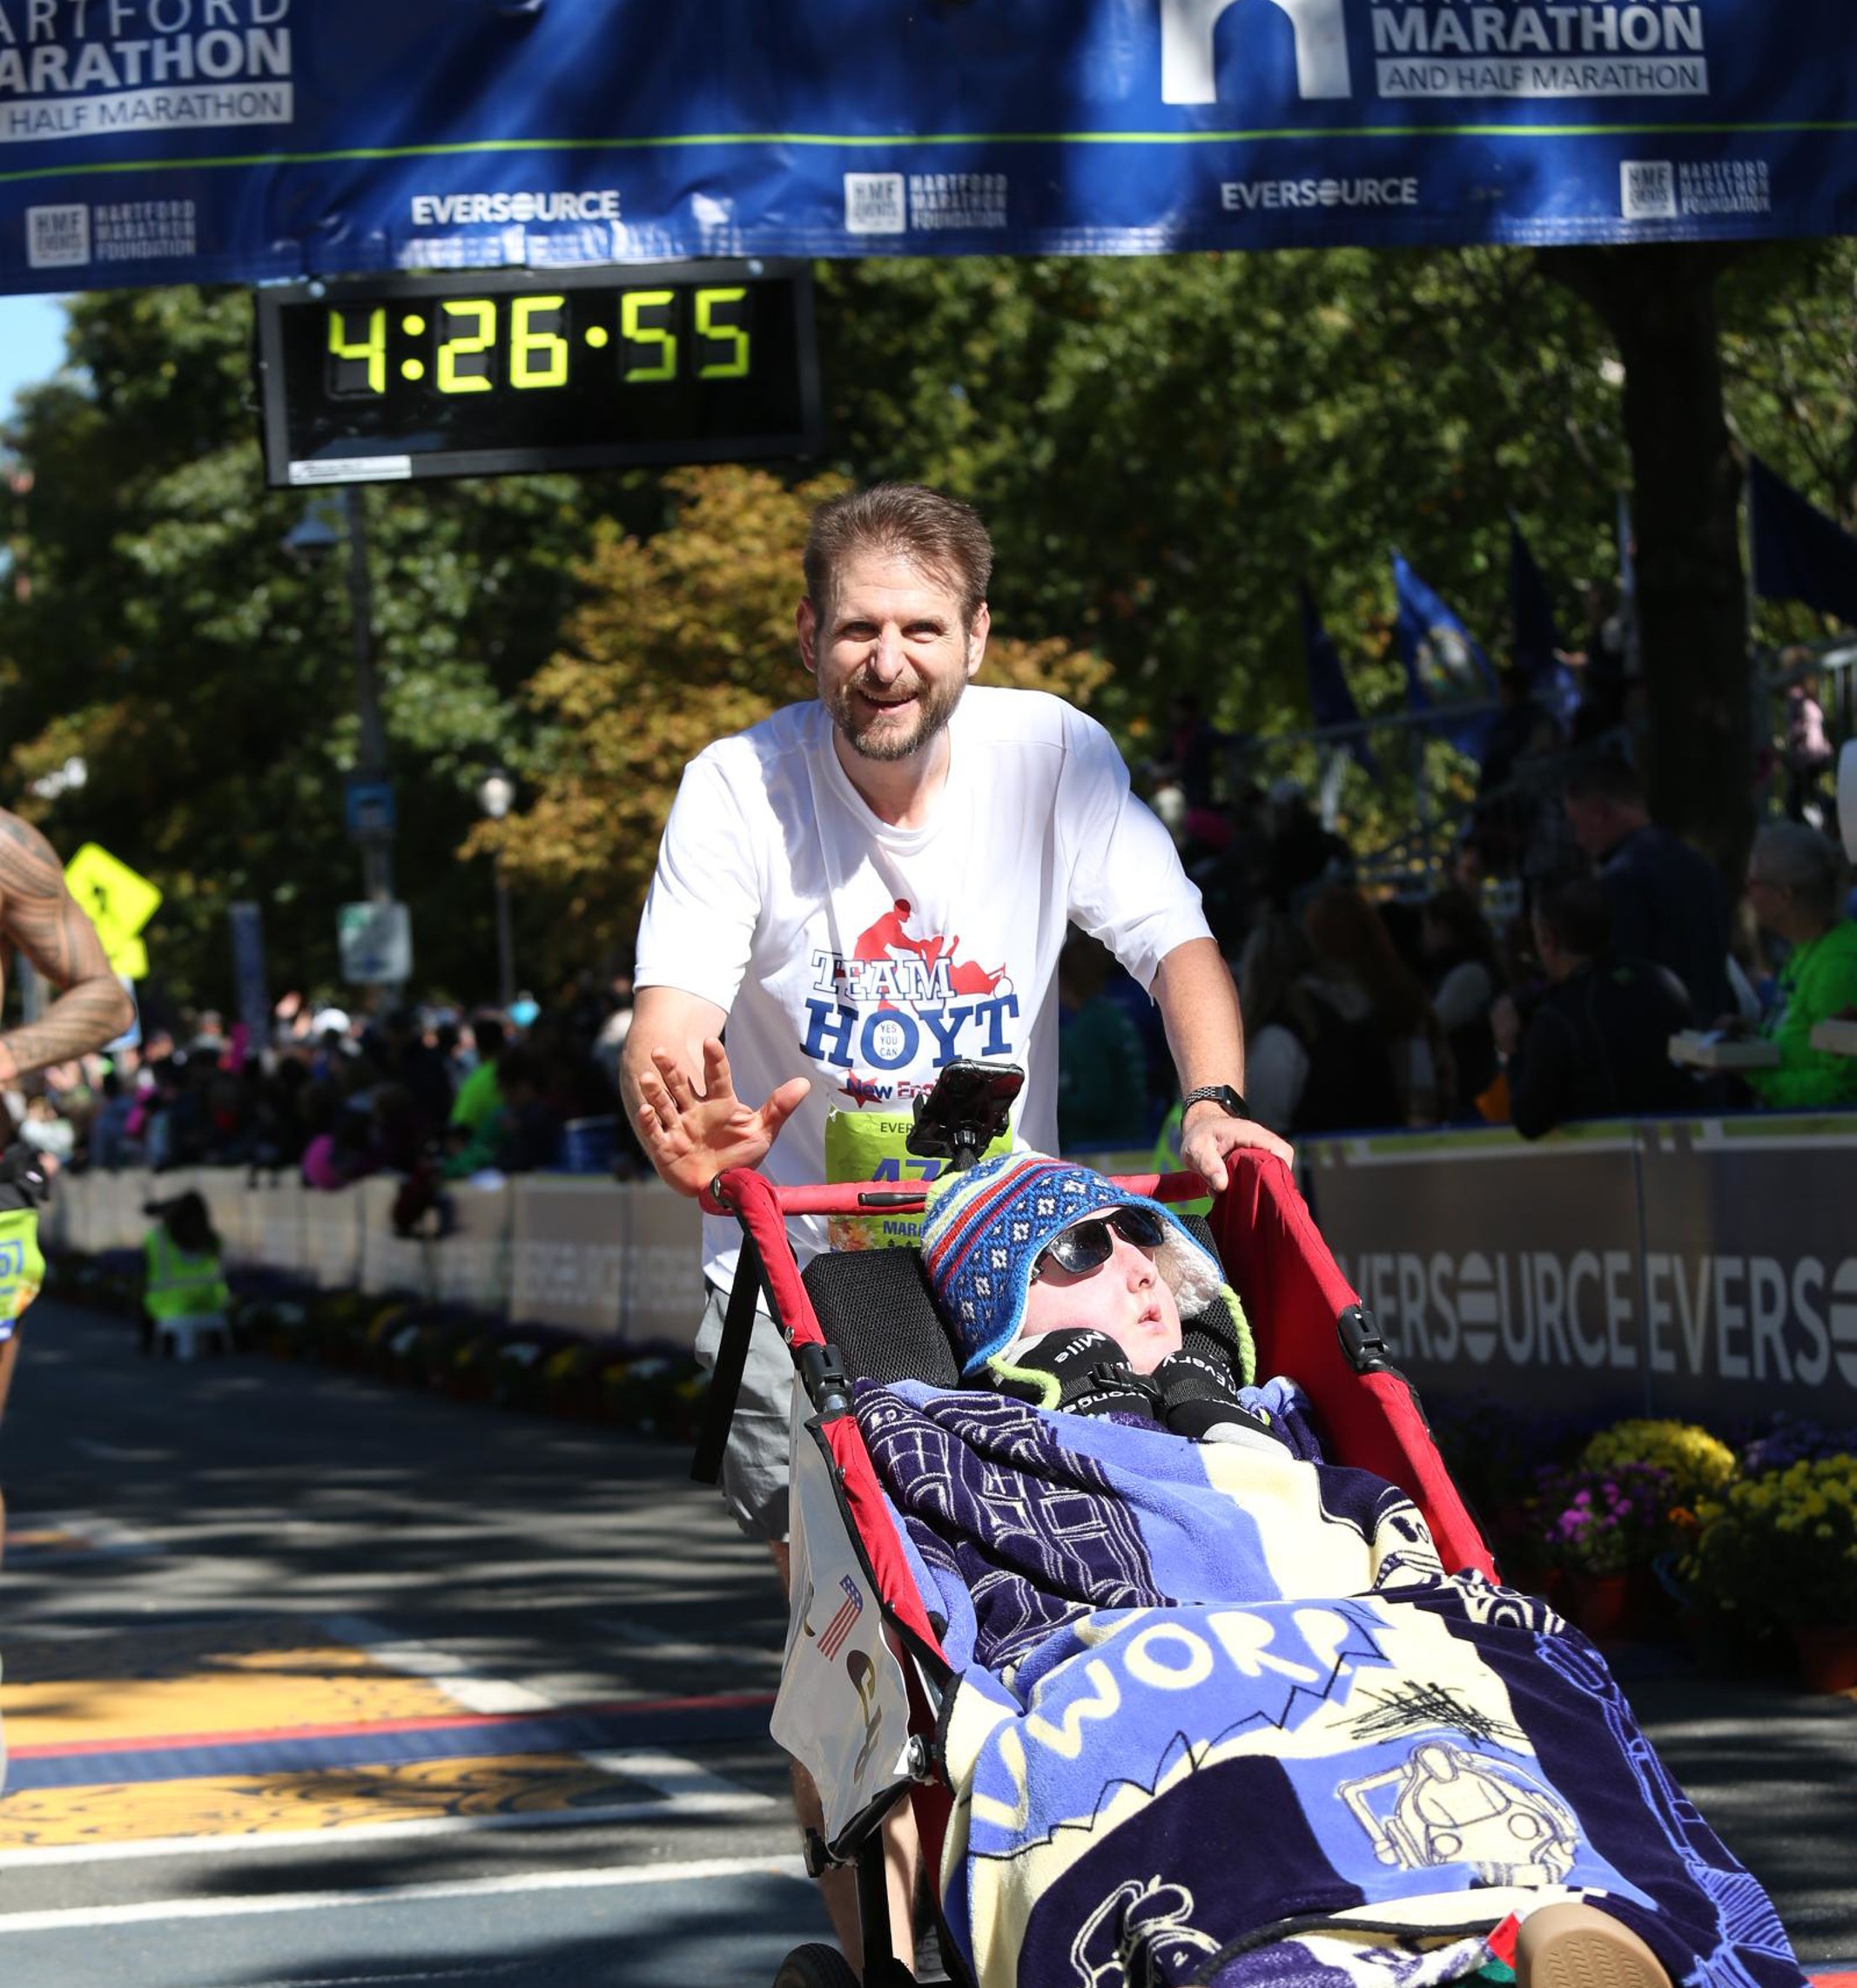 Dean and Keion Manley crossing the finish line at the Eversource Hartford Marathon in 2022.